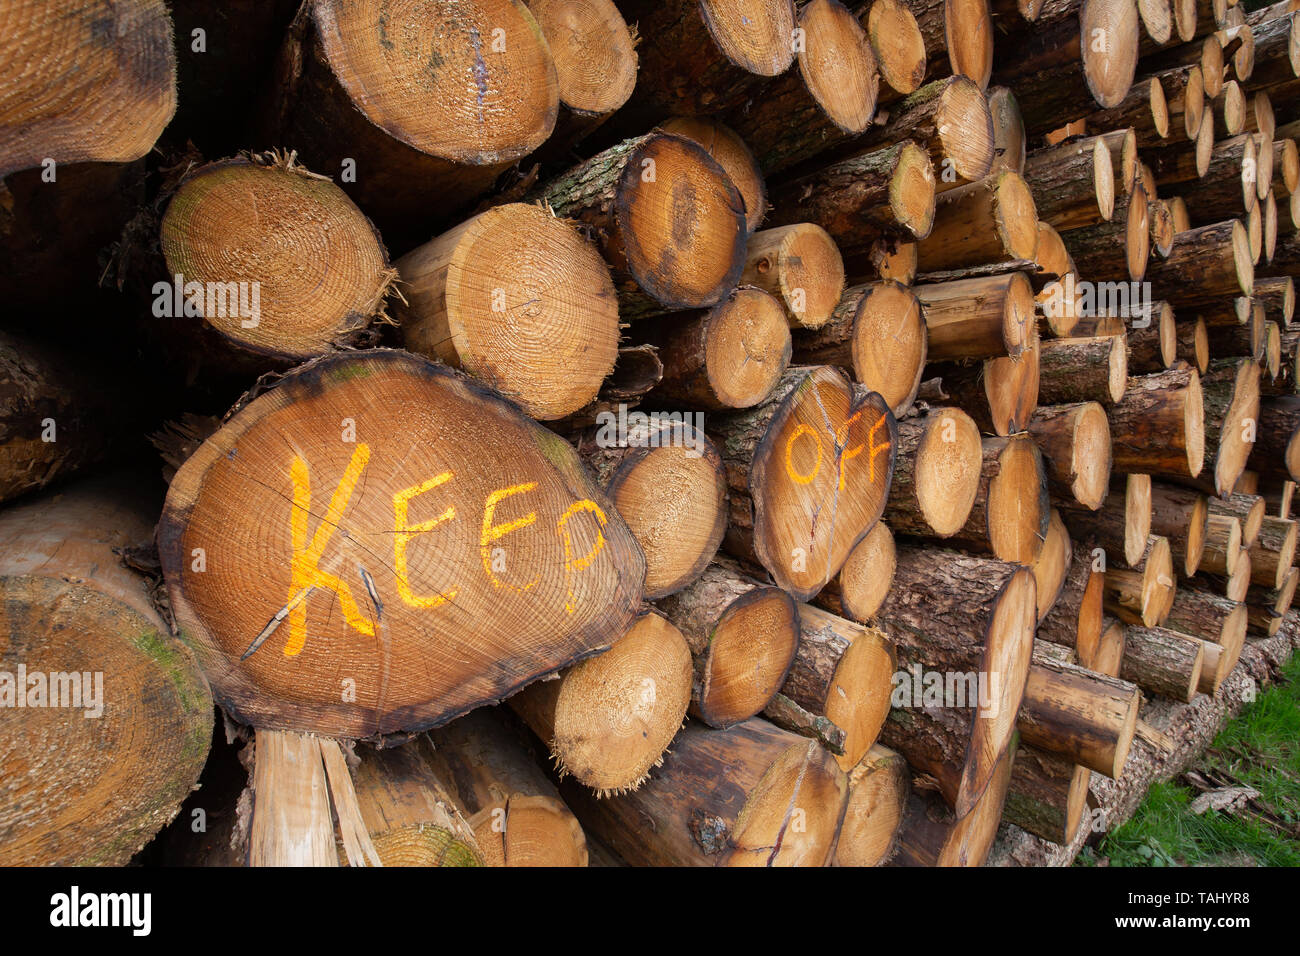 Pile of cut trees with 'Keep Off' sign Stock Photo